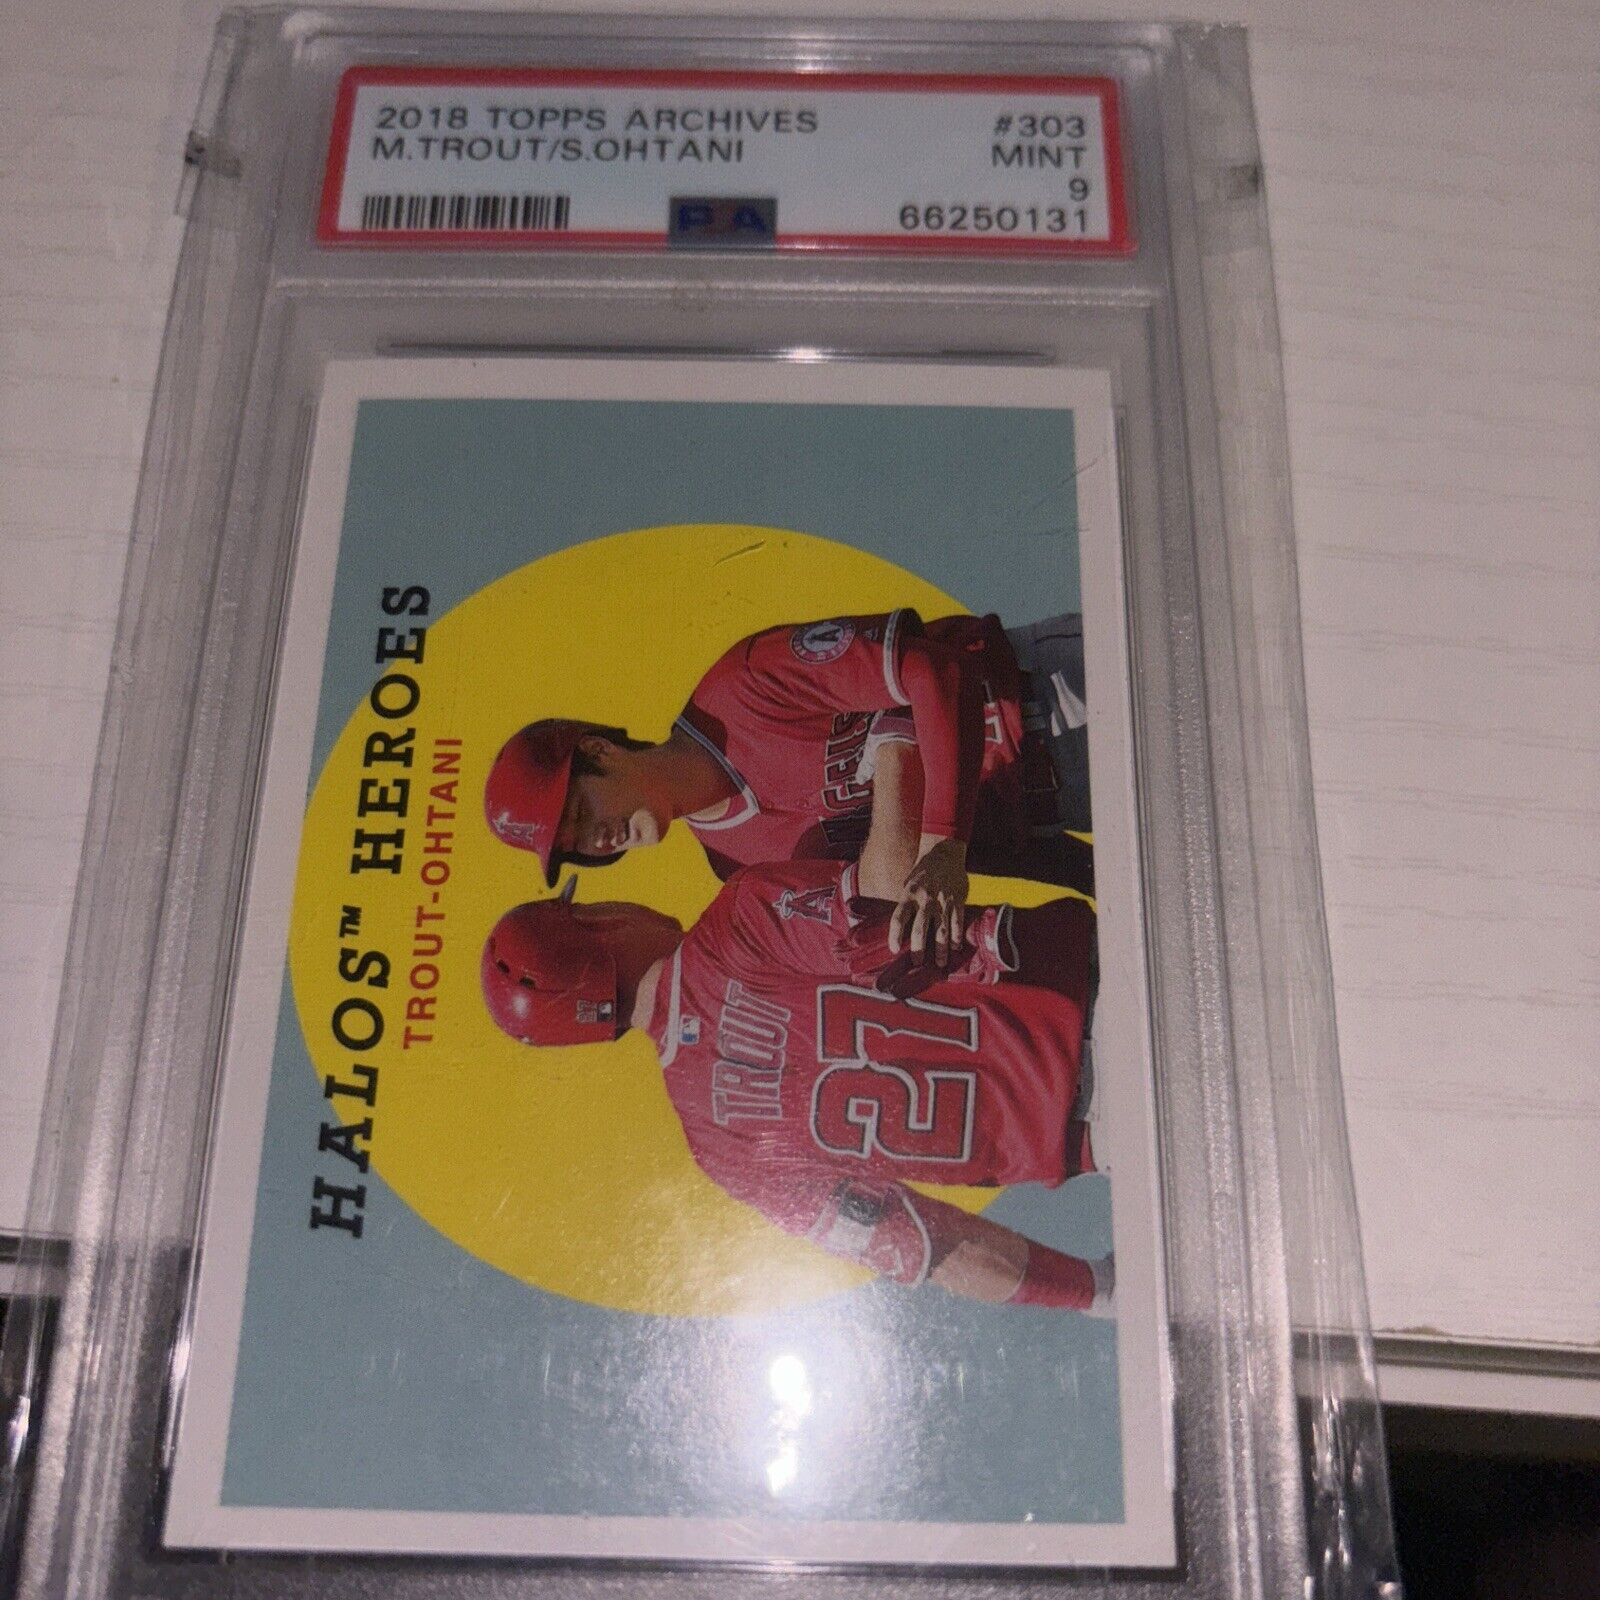 Mike trout and shohei ohtani 2018 topps archives psa 9 #303